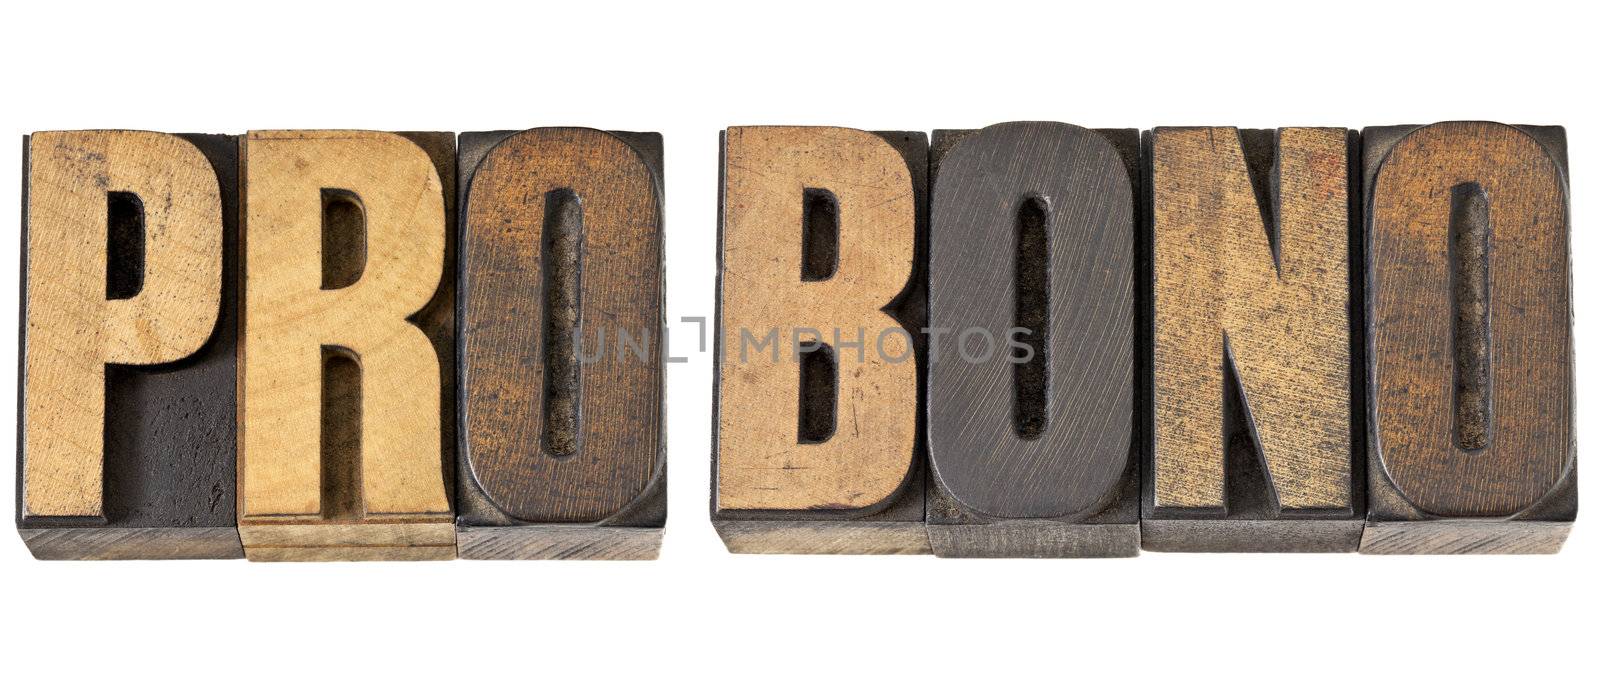 pro bono - free service concept -isolated text in vintage letterpress wood type